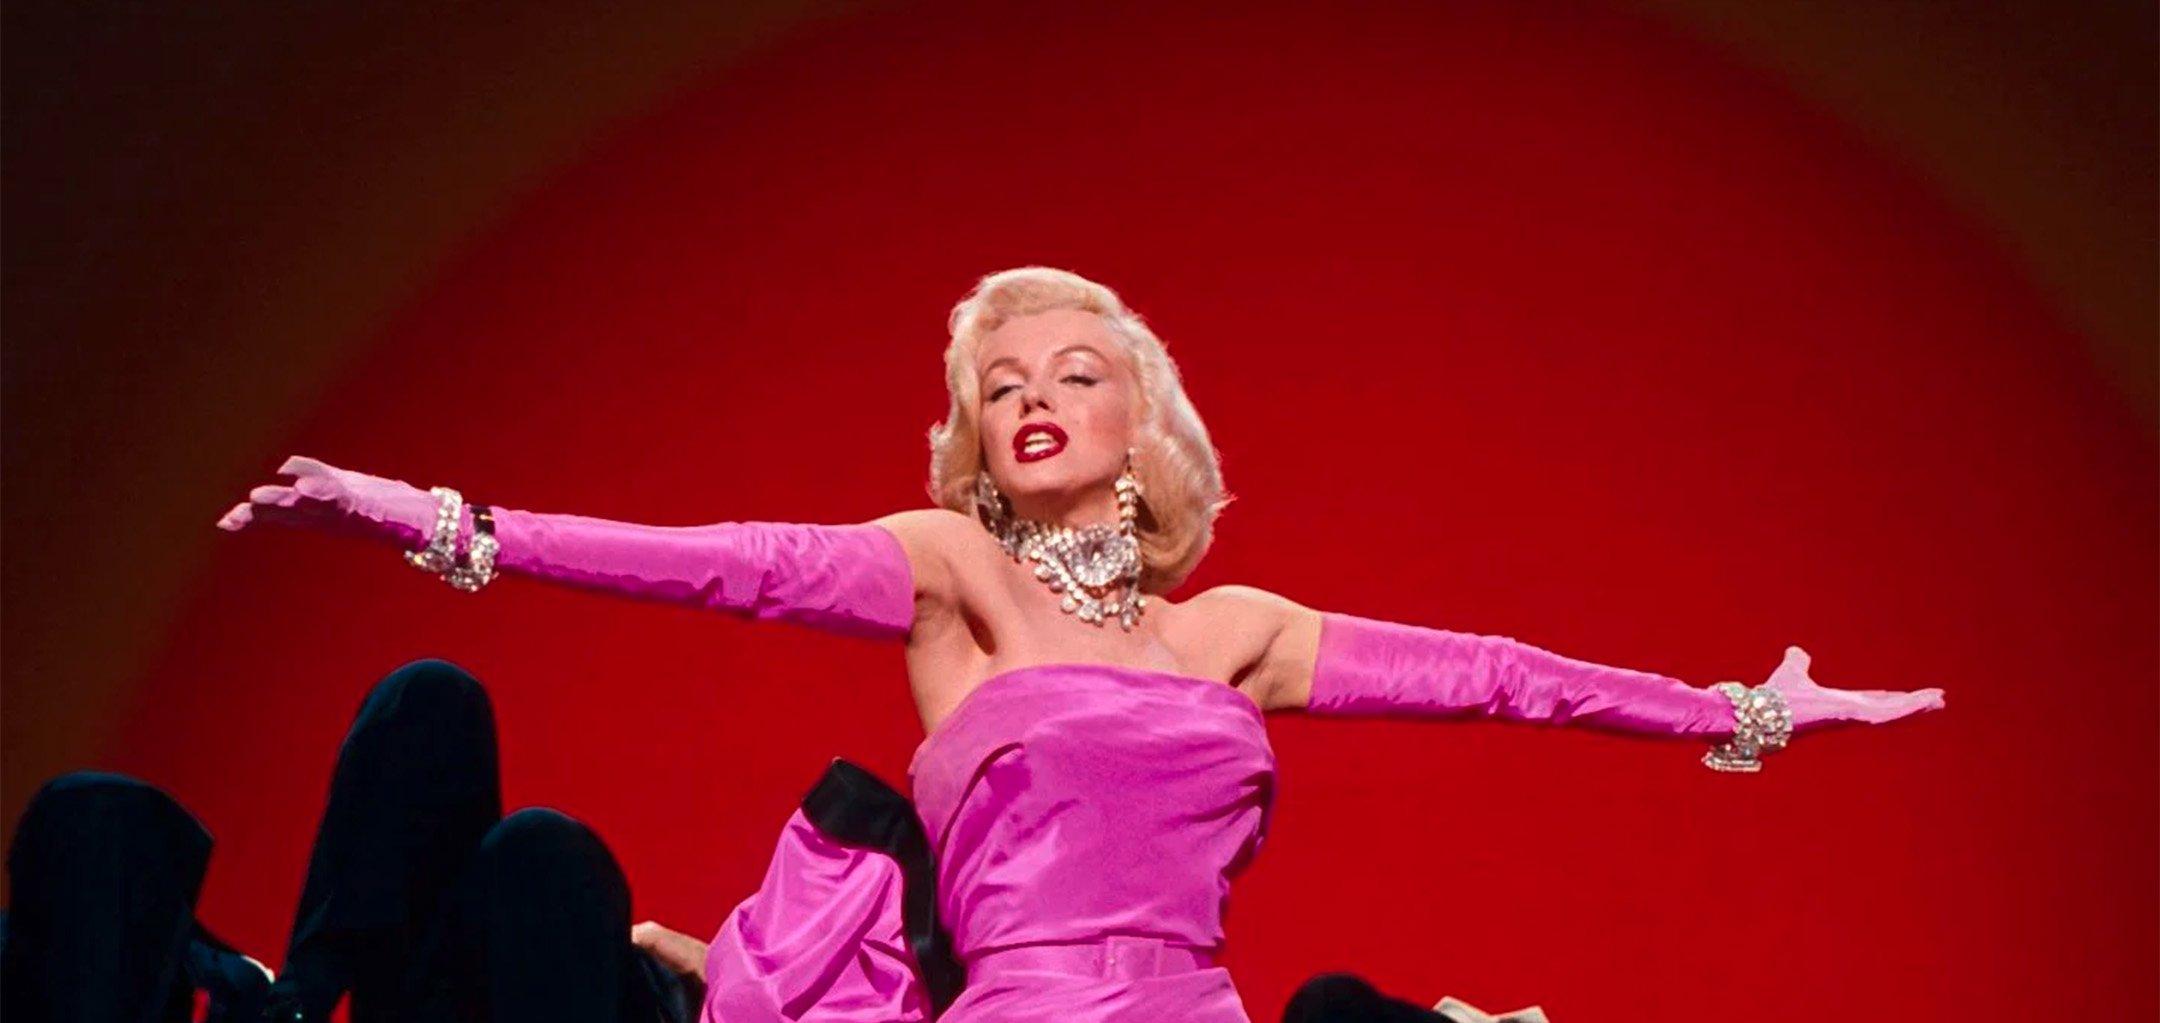 Story of Marilyn Monroe's Iconic Legacy